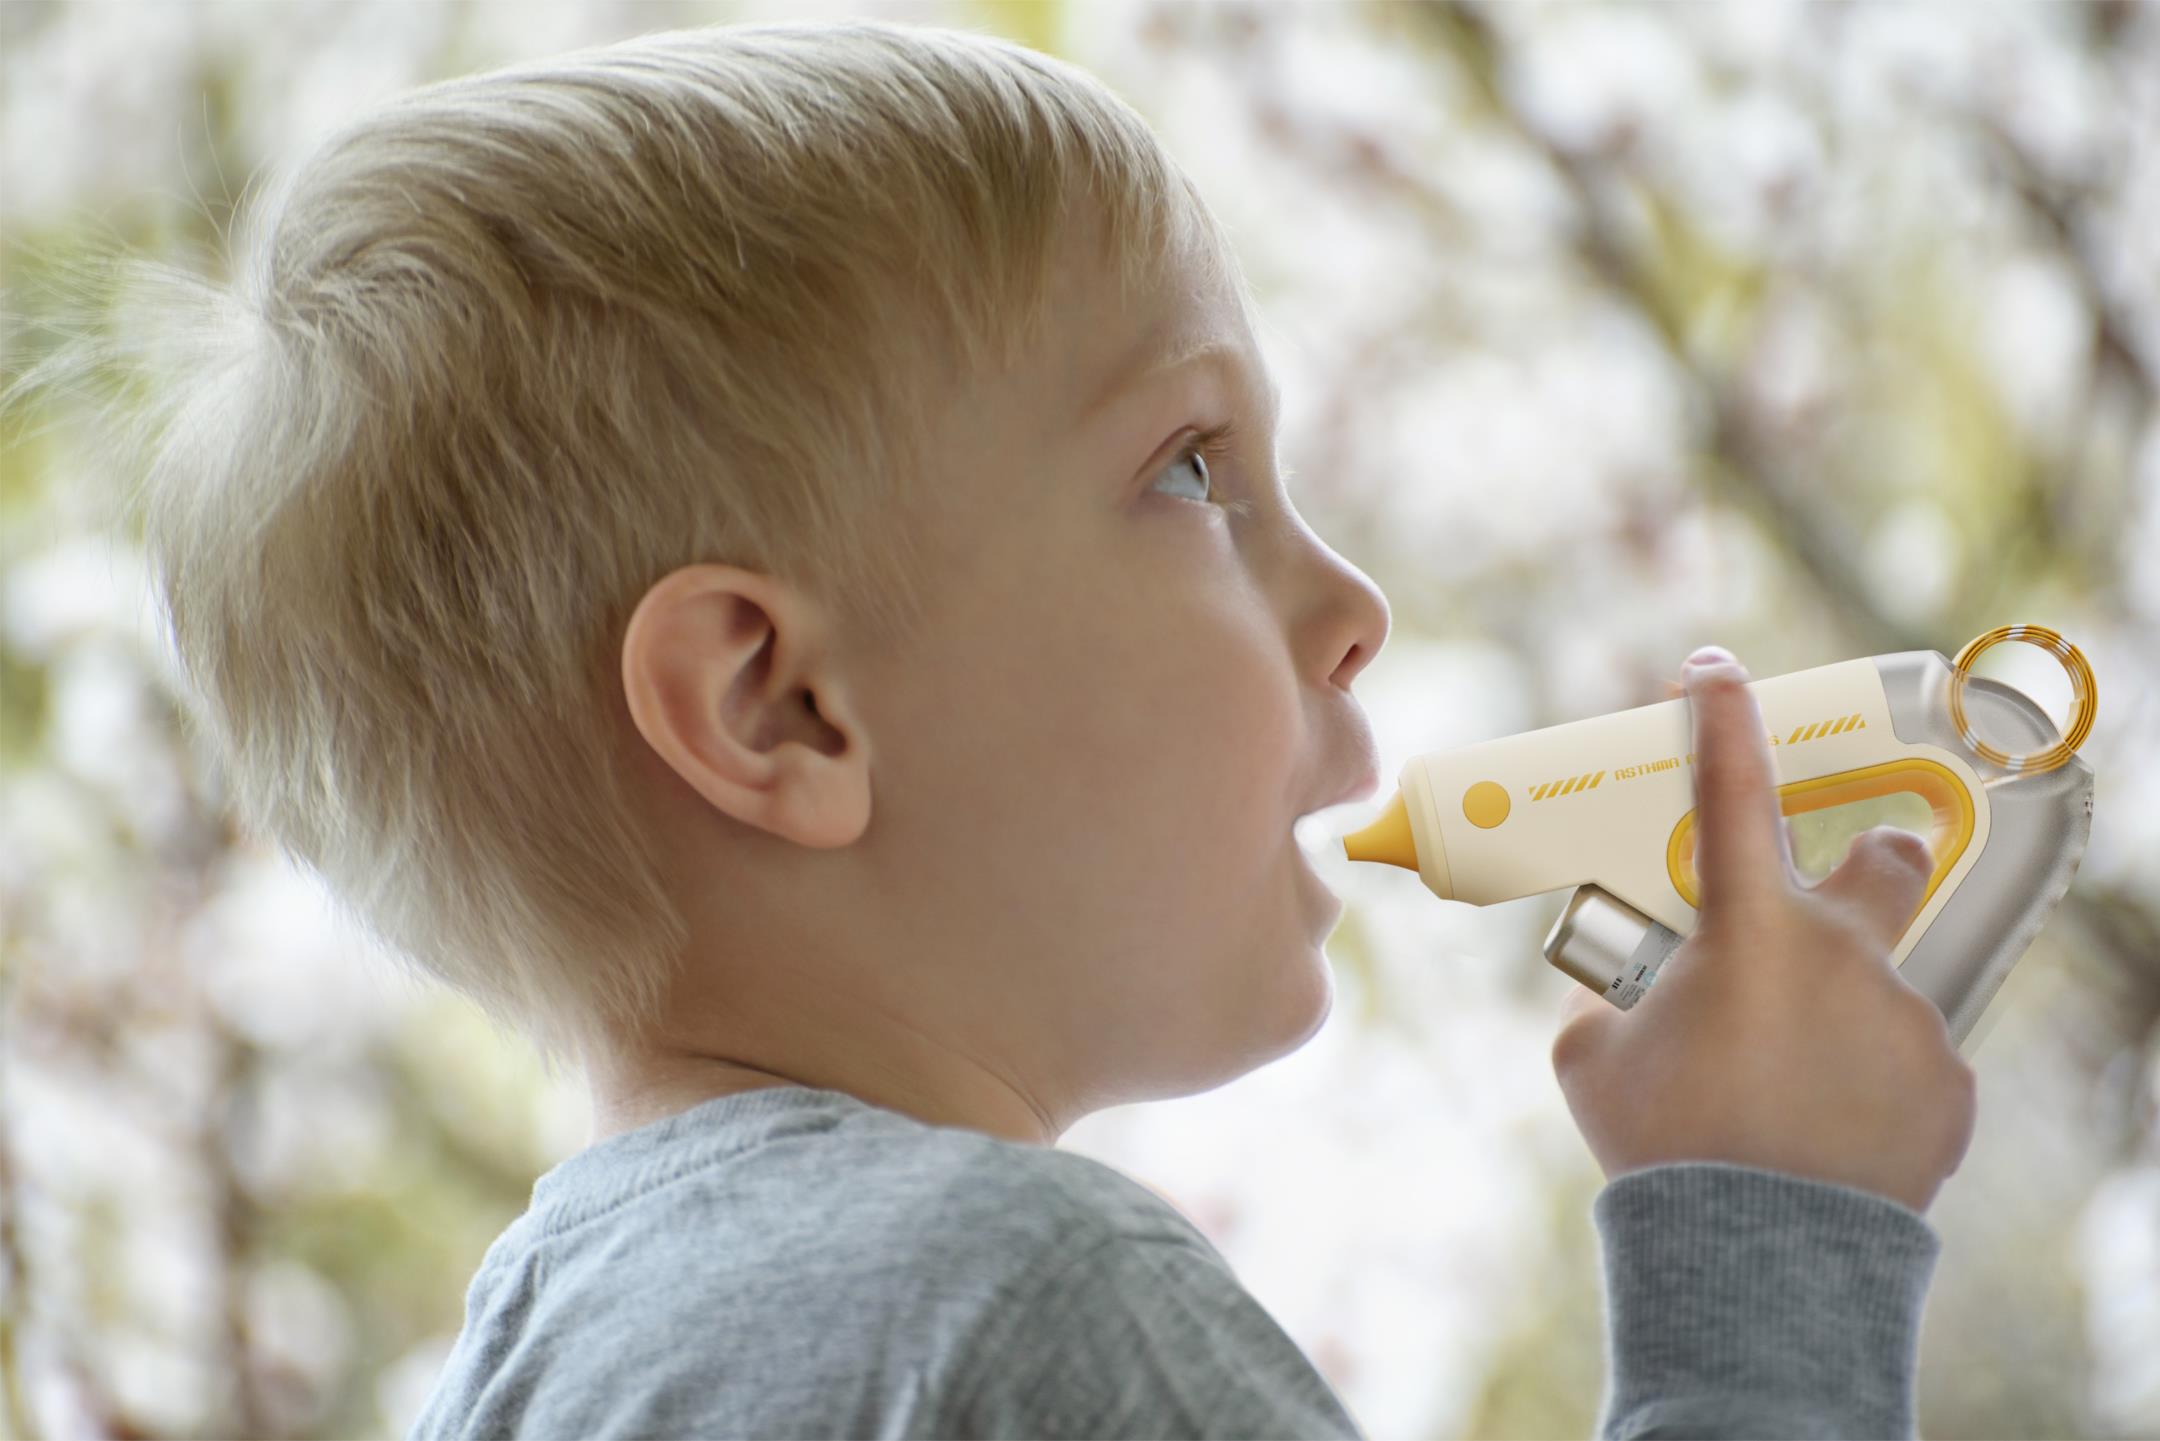 Easy GOOSE - A Medical Product for Children with Asthma